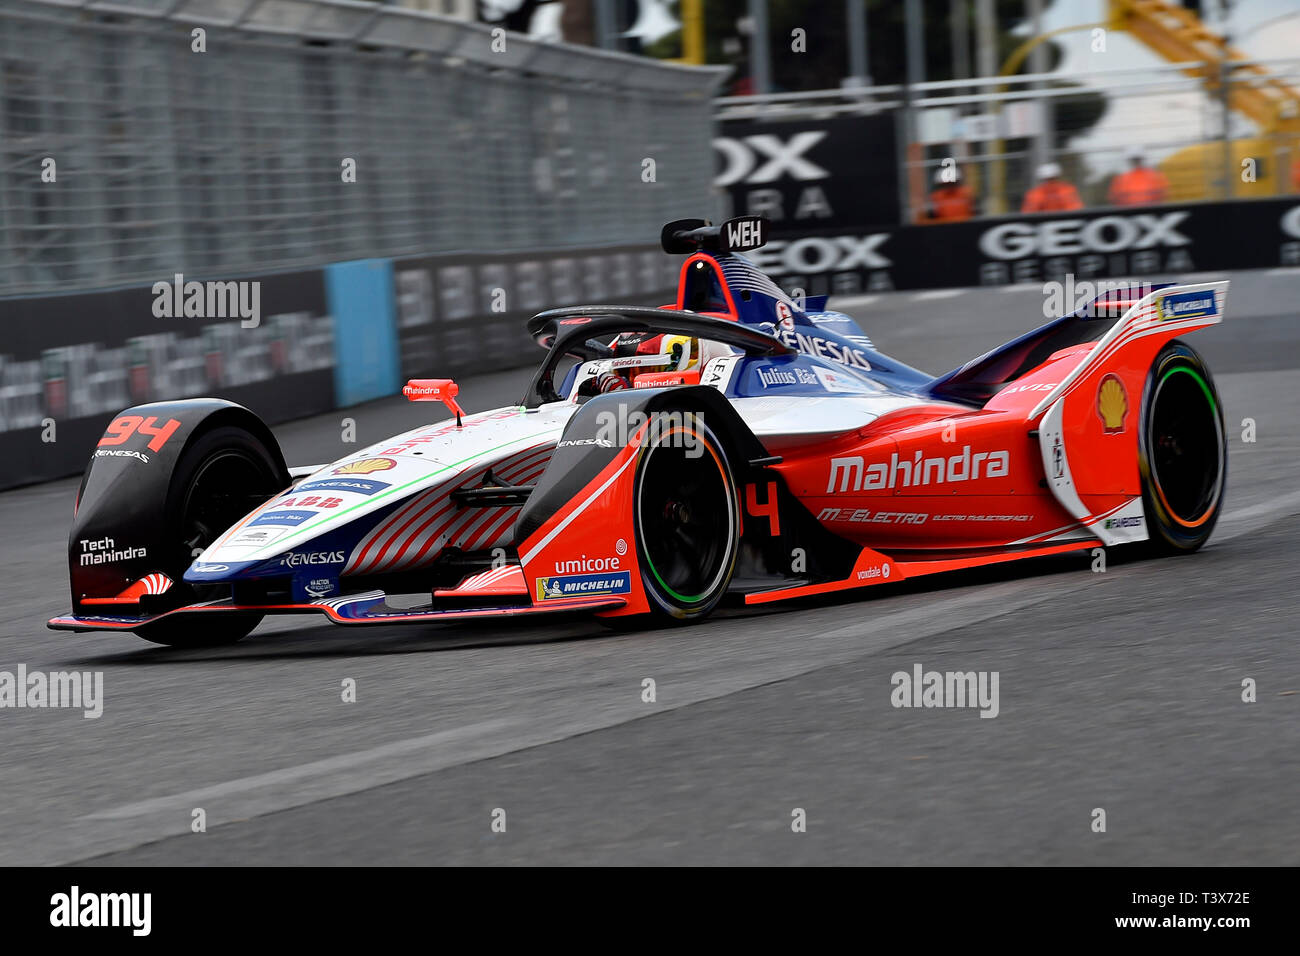 Rome, Italy. 12th Apr 2019. Pascal Wehrlein ( Mahindra Racing ) during the  shakedown before the 2019 GEOX Rome E-Prix at Circuto Cittadino dell'EUR,  Rome, Italy on 12 April 2019. Photo by